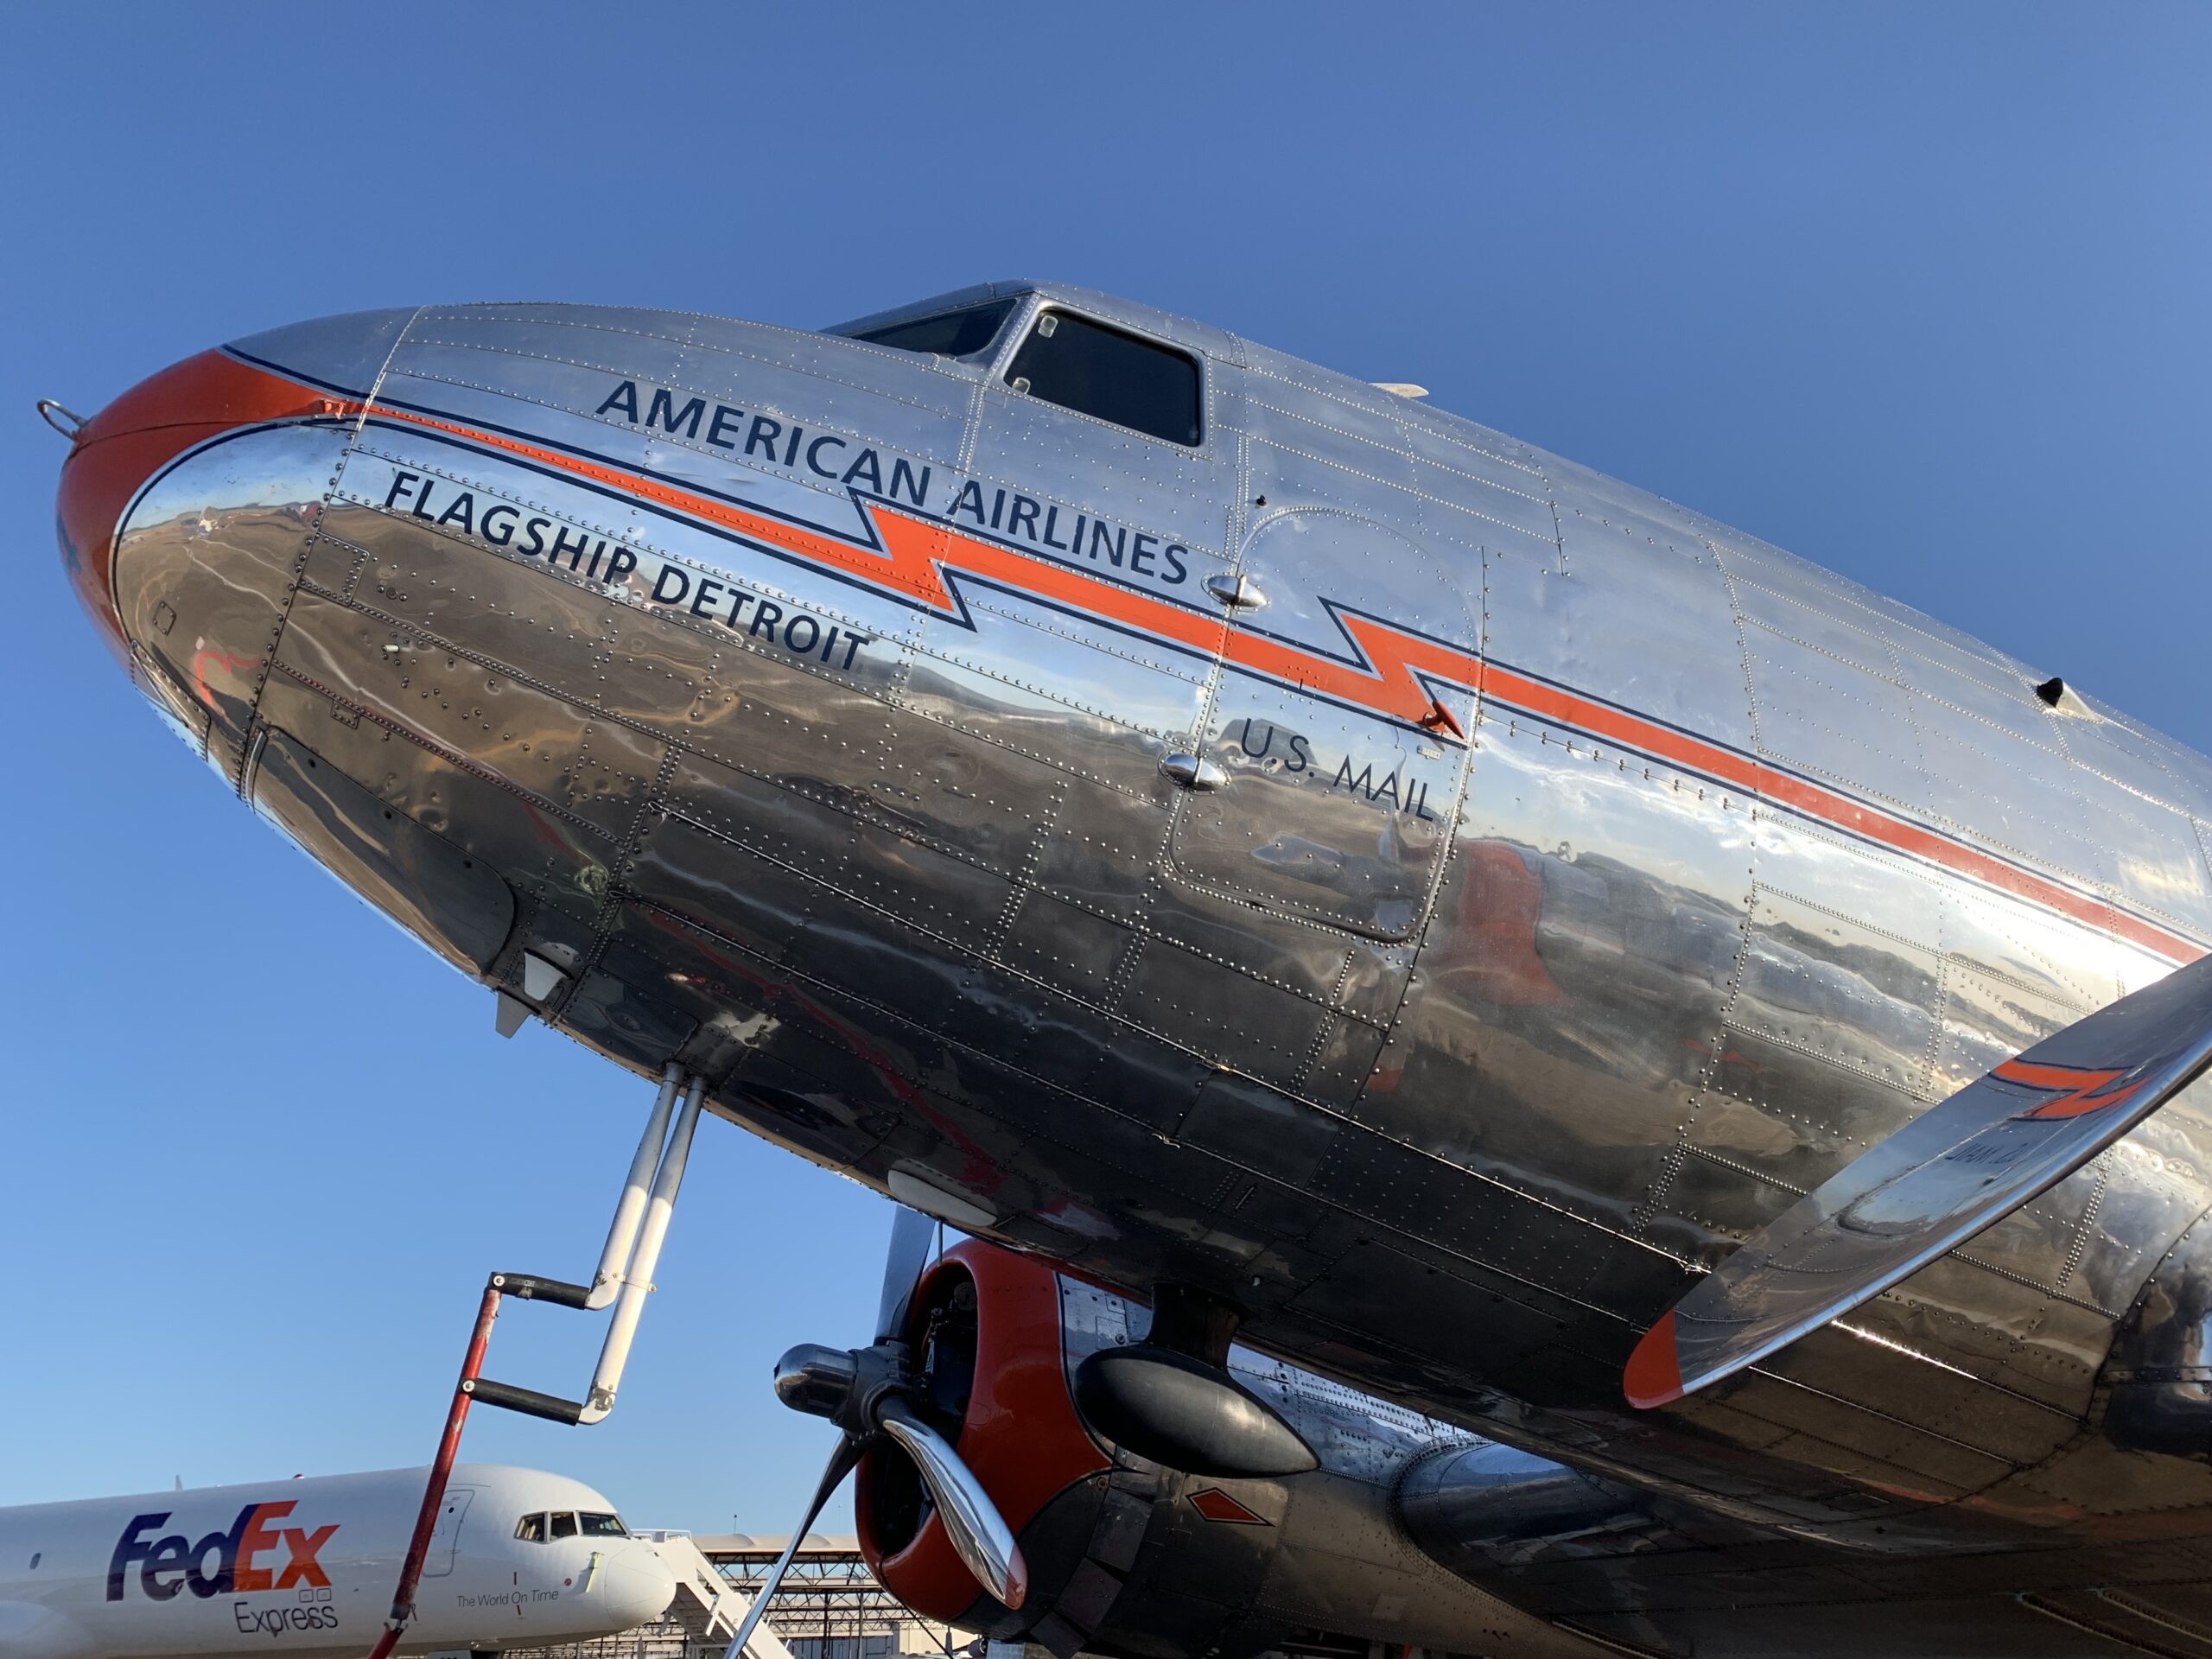 Flagship Detroit in the colors of American Airlines. This aircraft was constructed in 1937